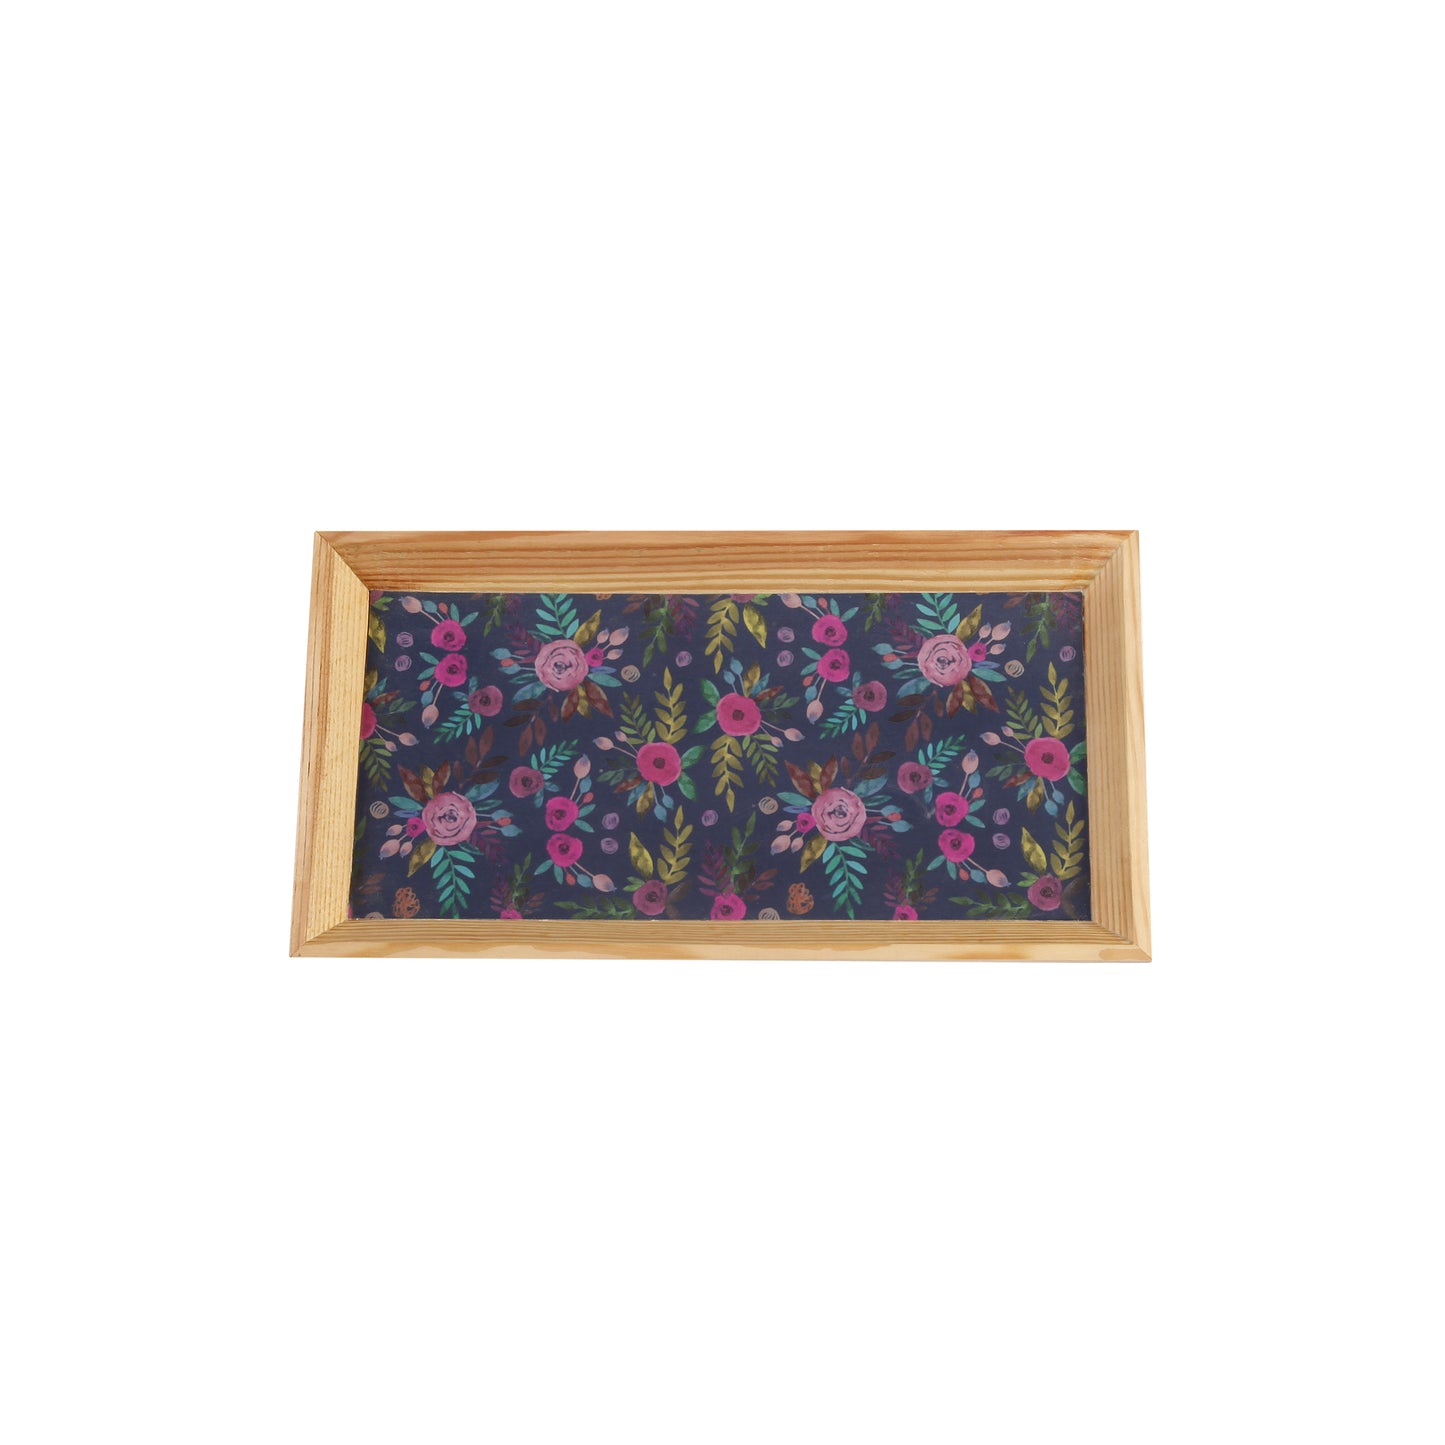 A Tiny Mistake Blue Floral Pattern Rectangle Wooden Serving Tray, 35 x 20 x 2 cm